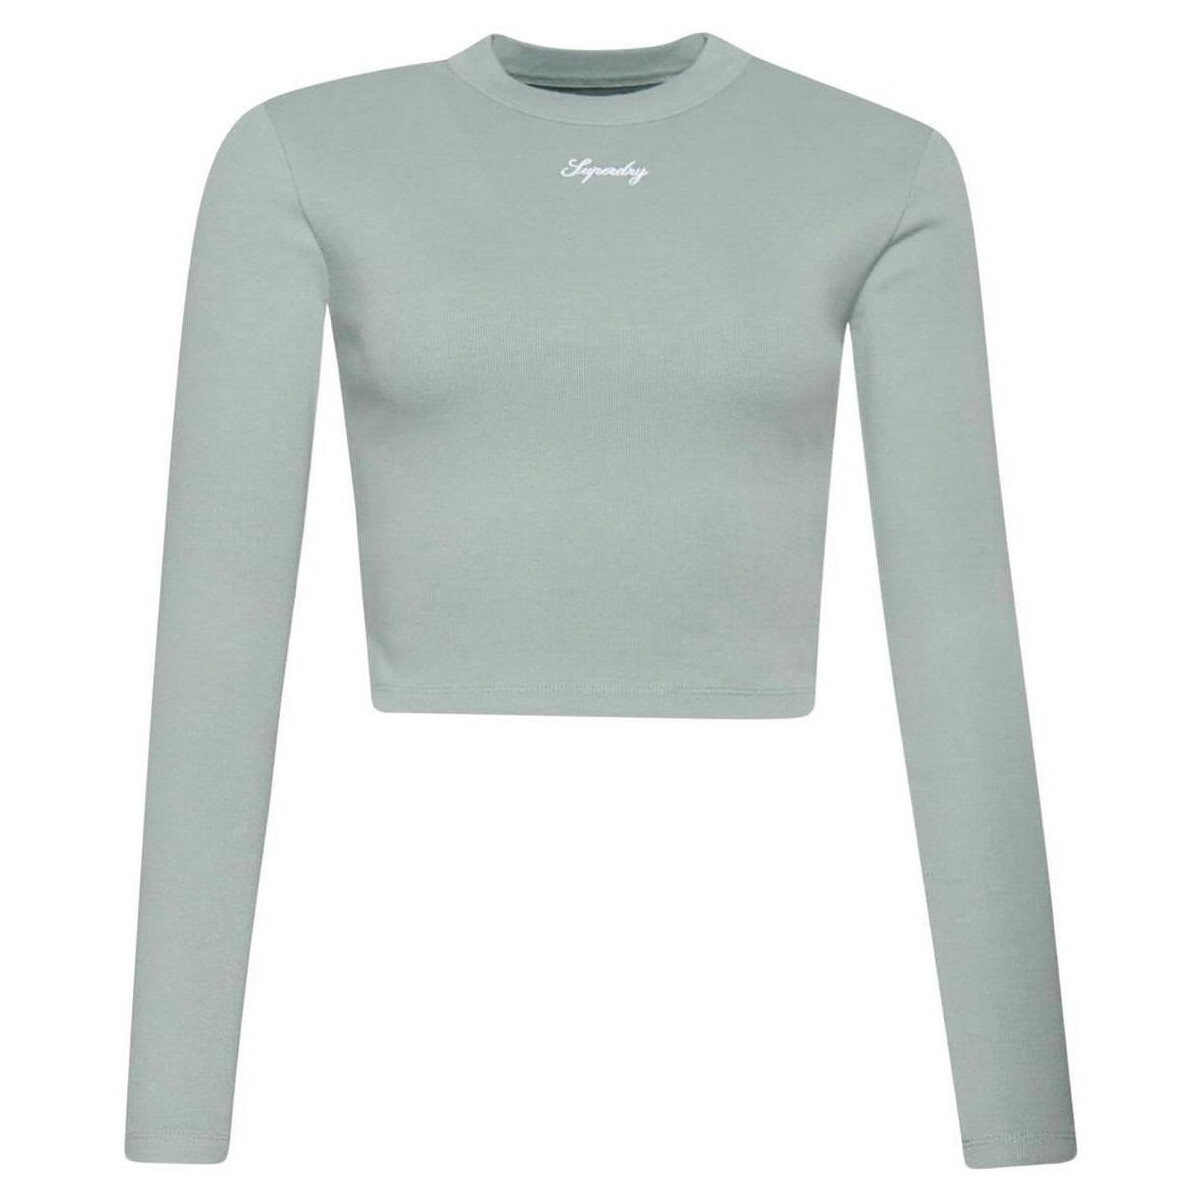 Vêtements Femme Update your casual wardrobe with this Hertitage Logo Crew Sweatshirt from Superdry  Vert